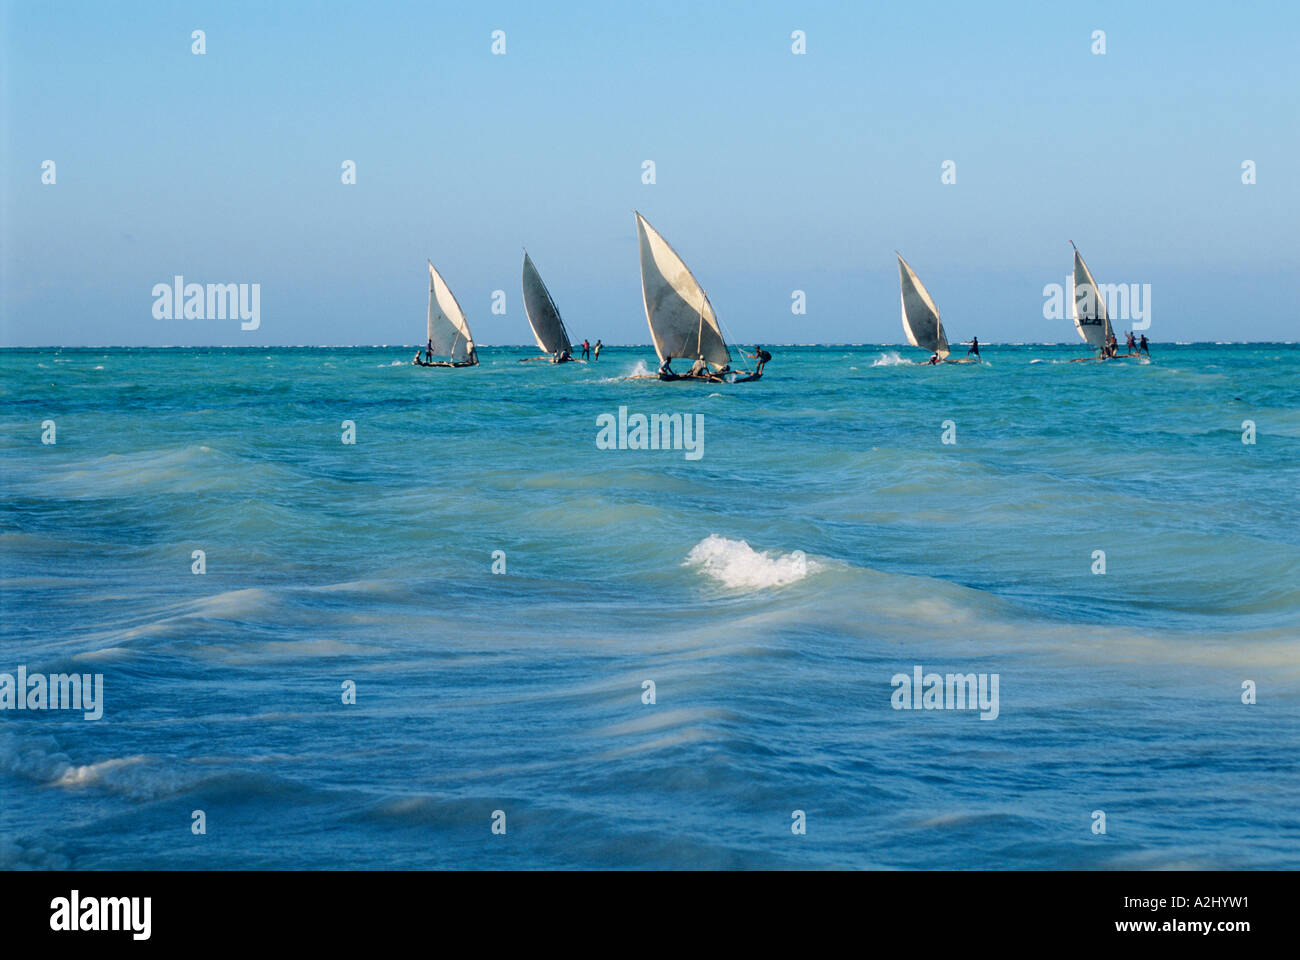 Small dhows race in Zanzibar's clear waters off Paje, on the island's east coast Stock Photo